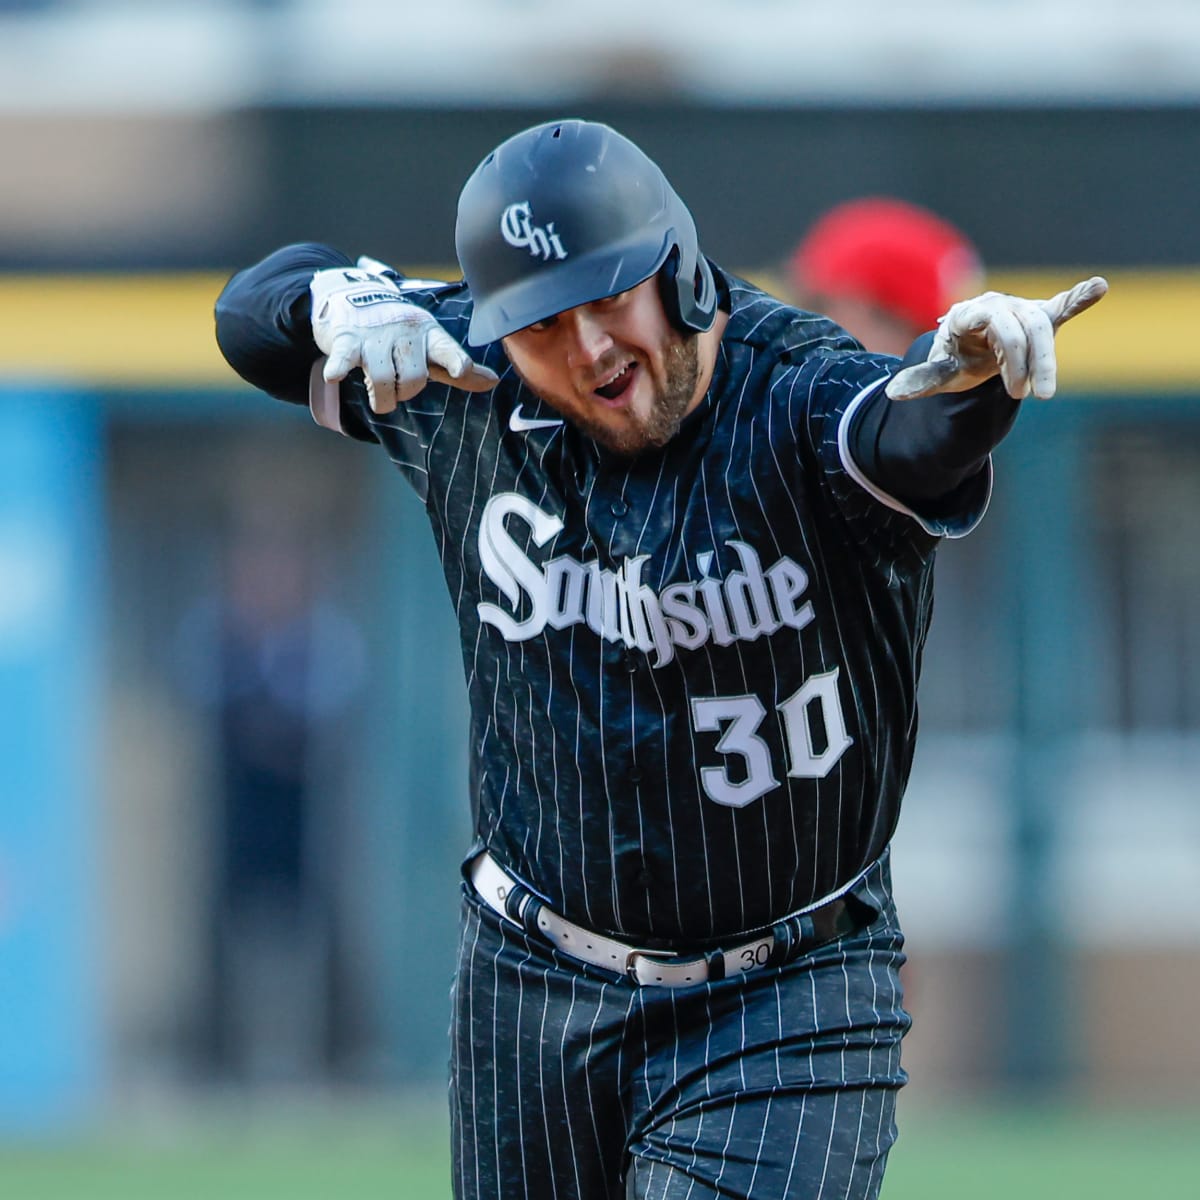 Family keeps White Sox' Jake Burger grounded - Chicago Sun-Times